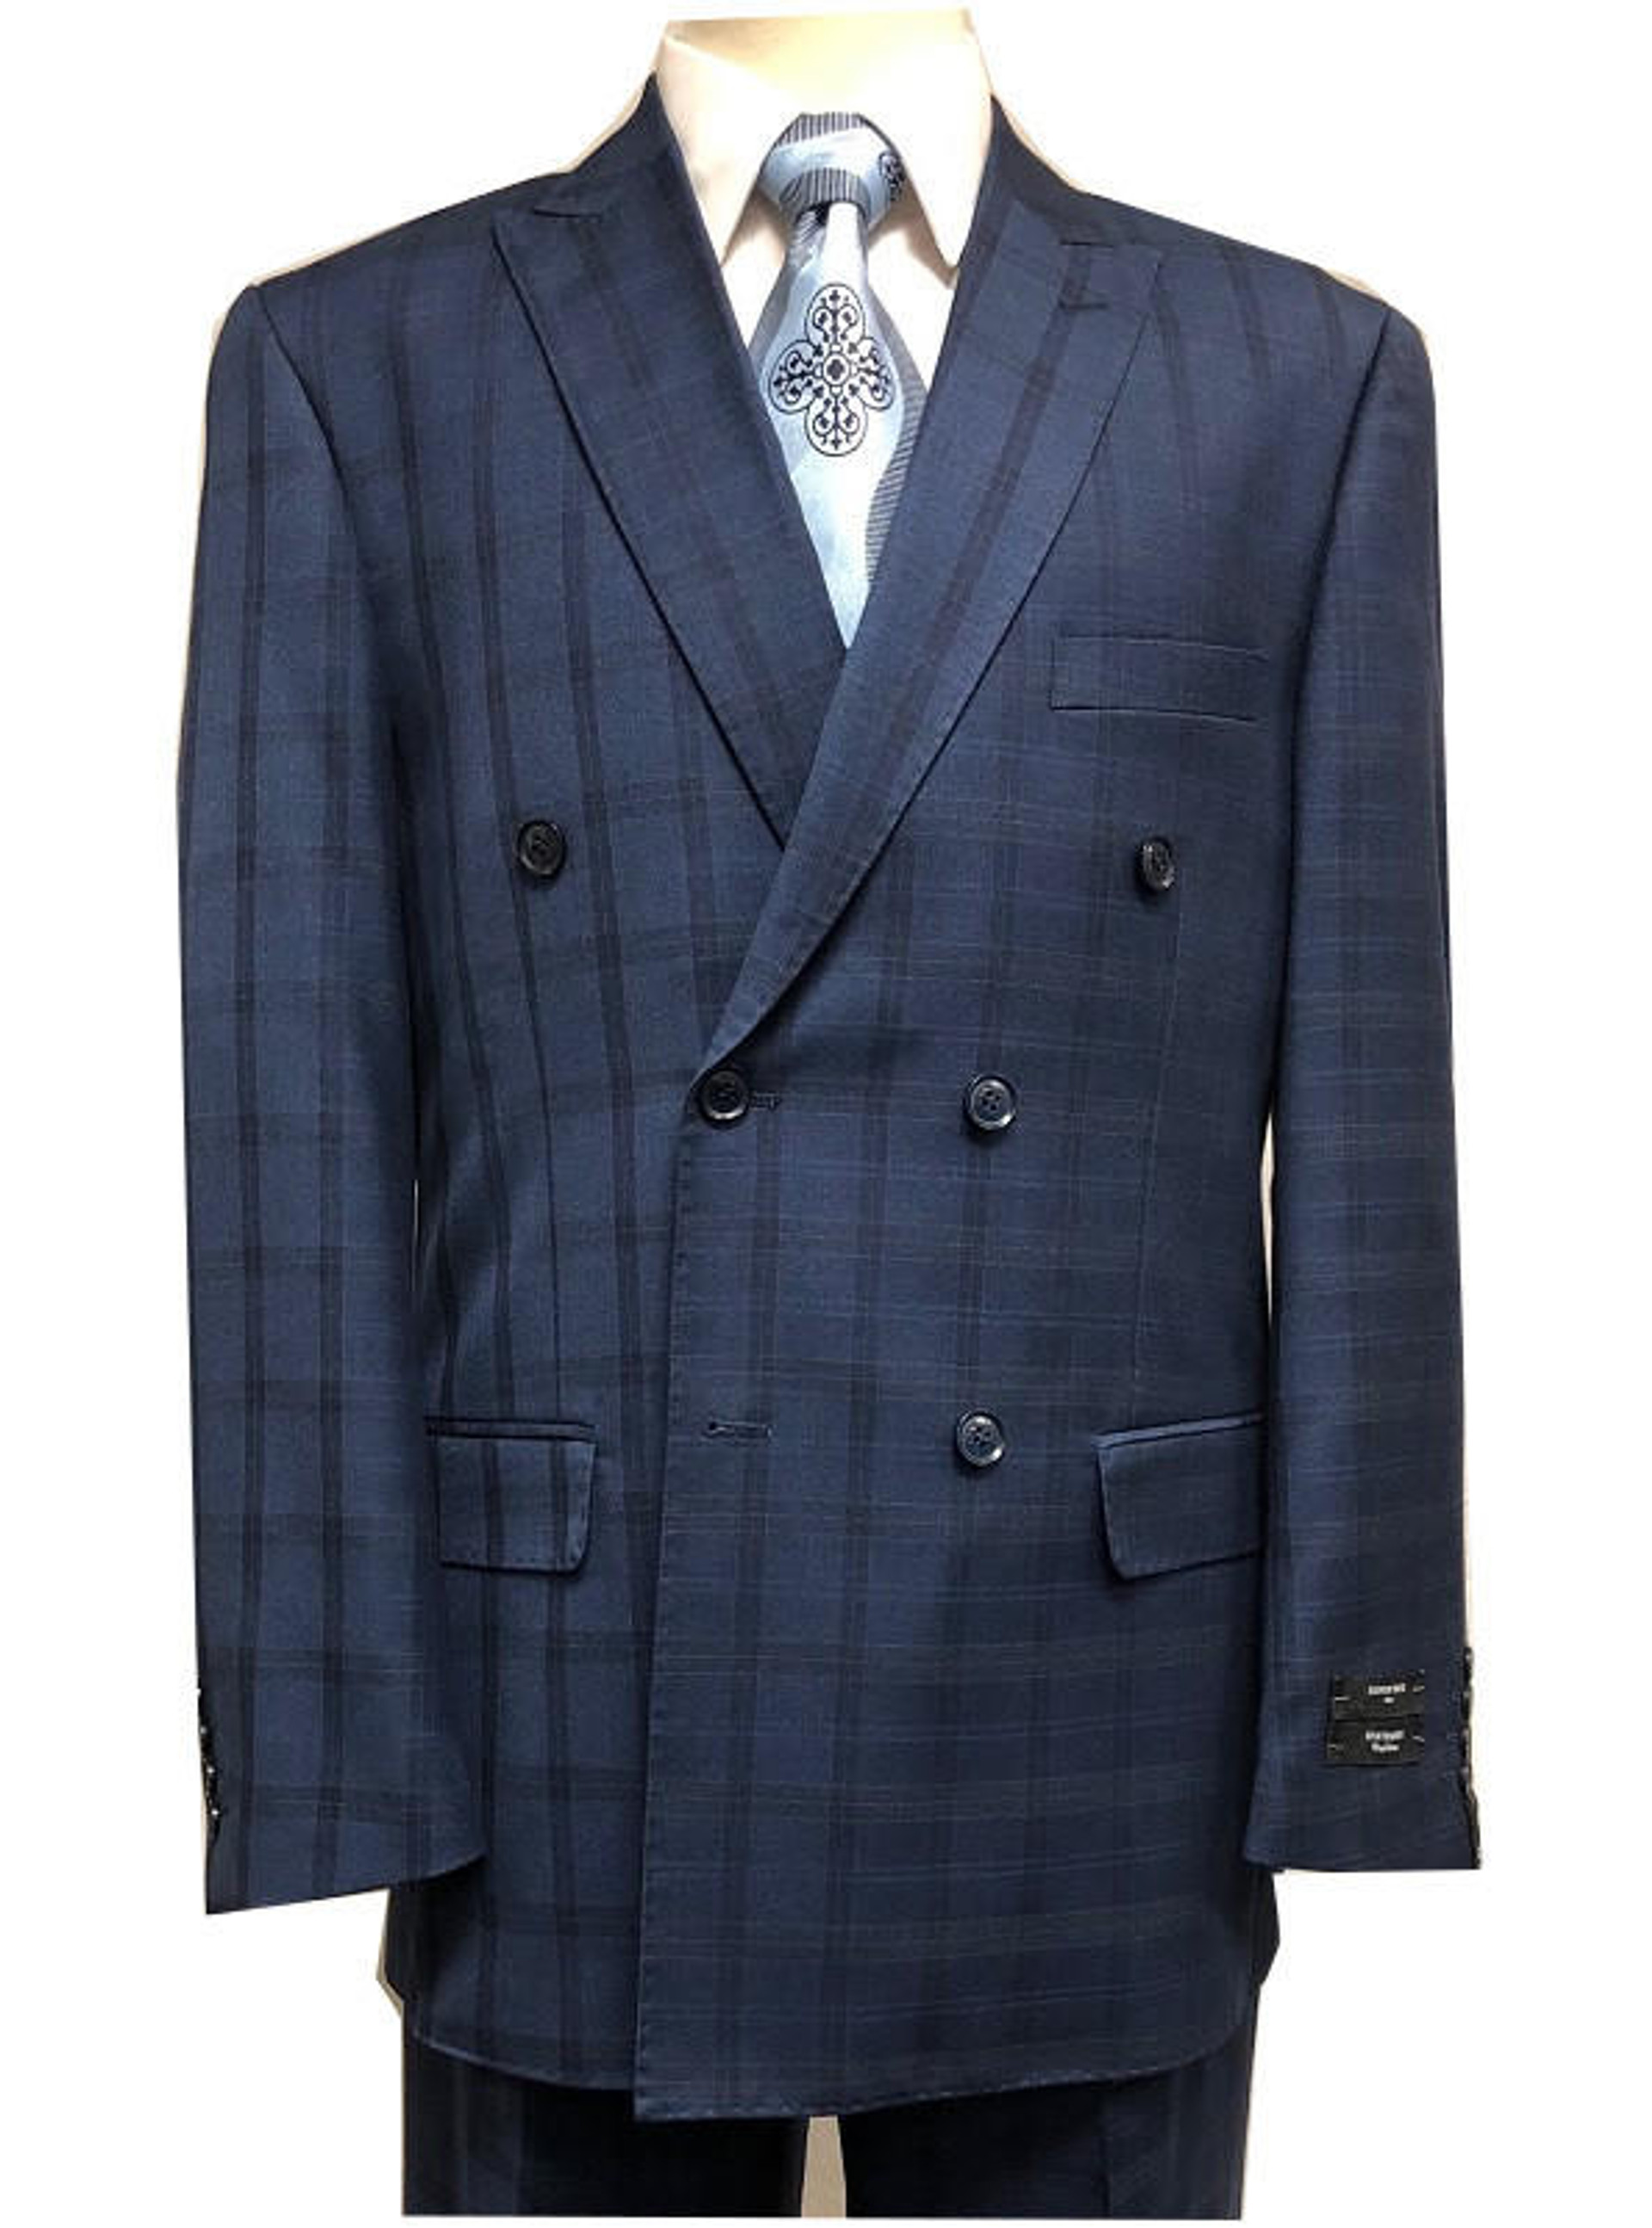 Statement Double Breasted Wool Suit Mens Sapphire Plaid SD-200 Size 54L